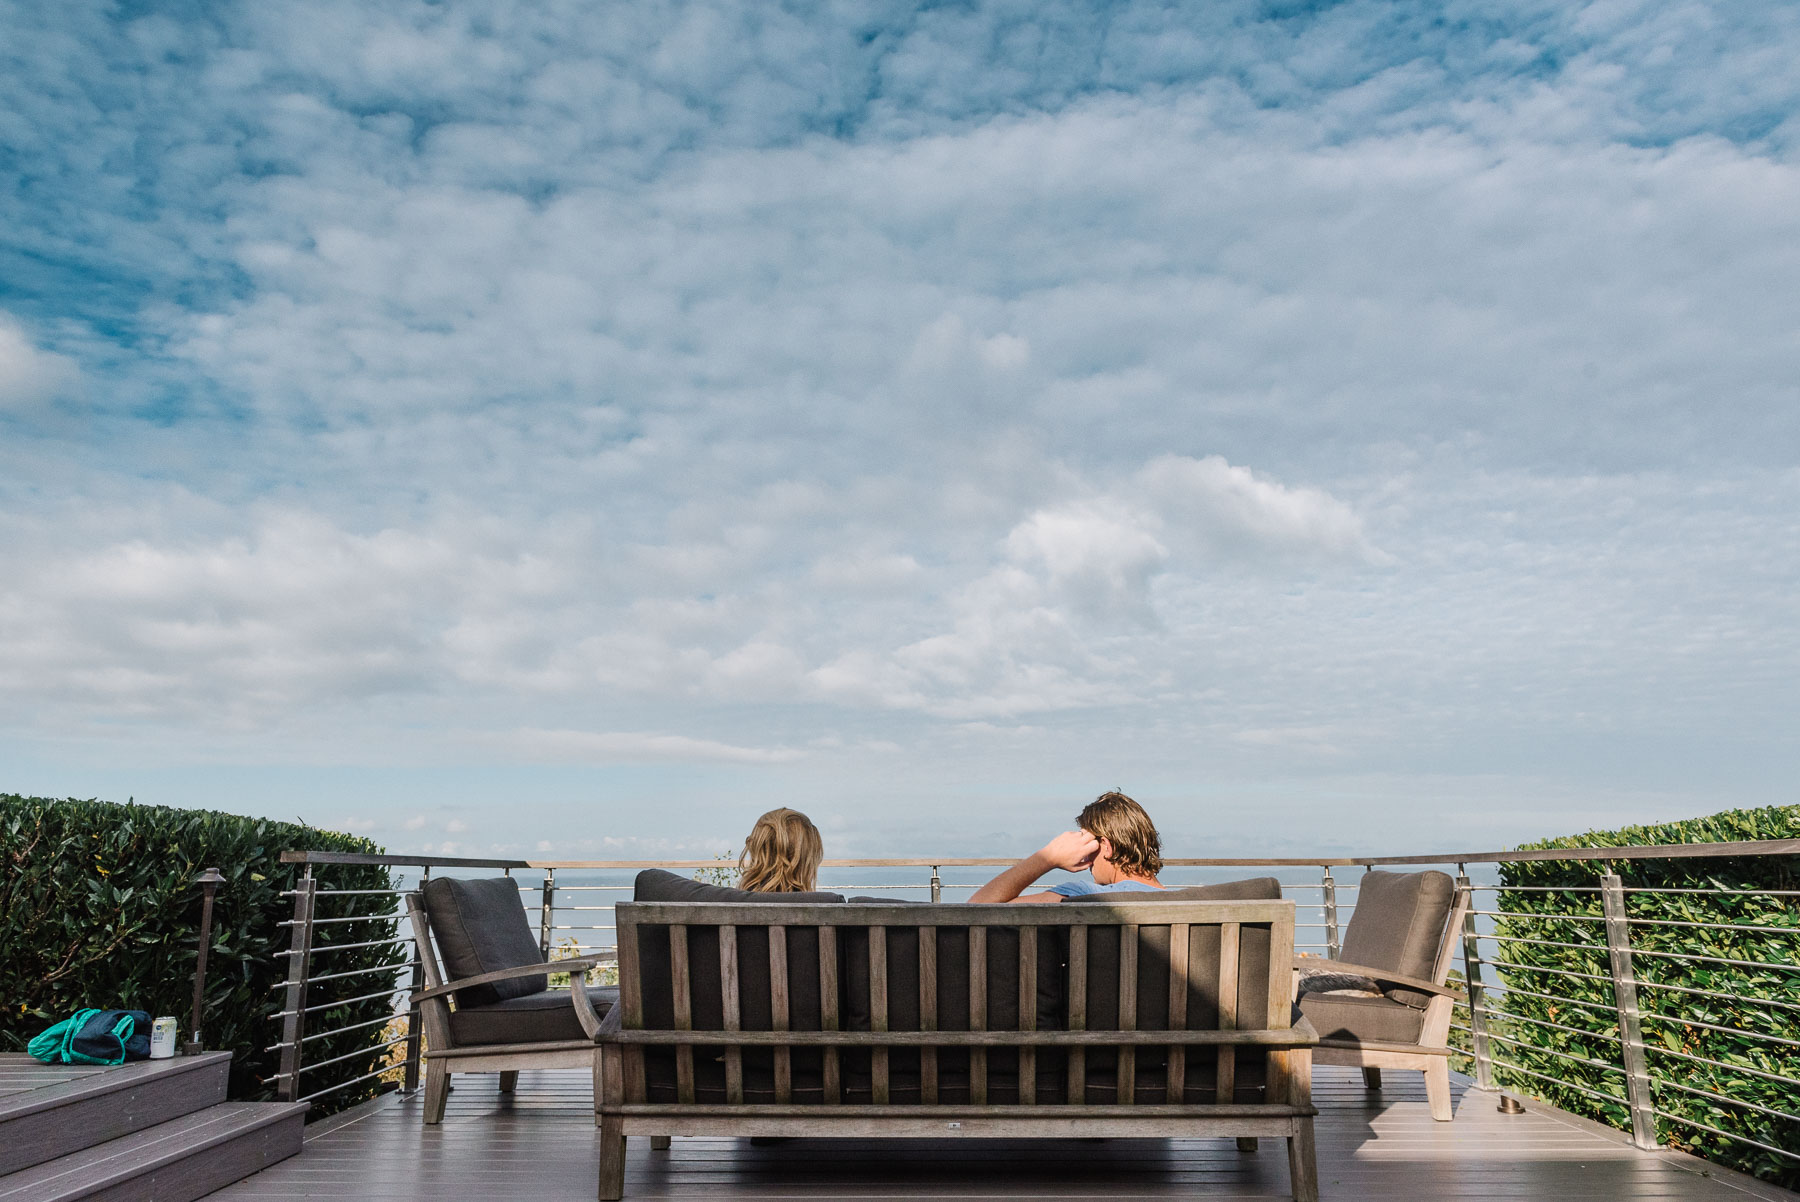 Wide angle view of family sitting on patio furniture outside on sunny day overlooking ocean